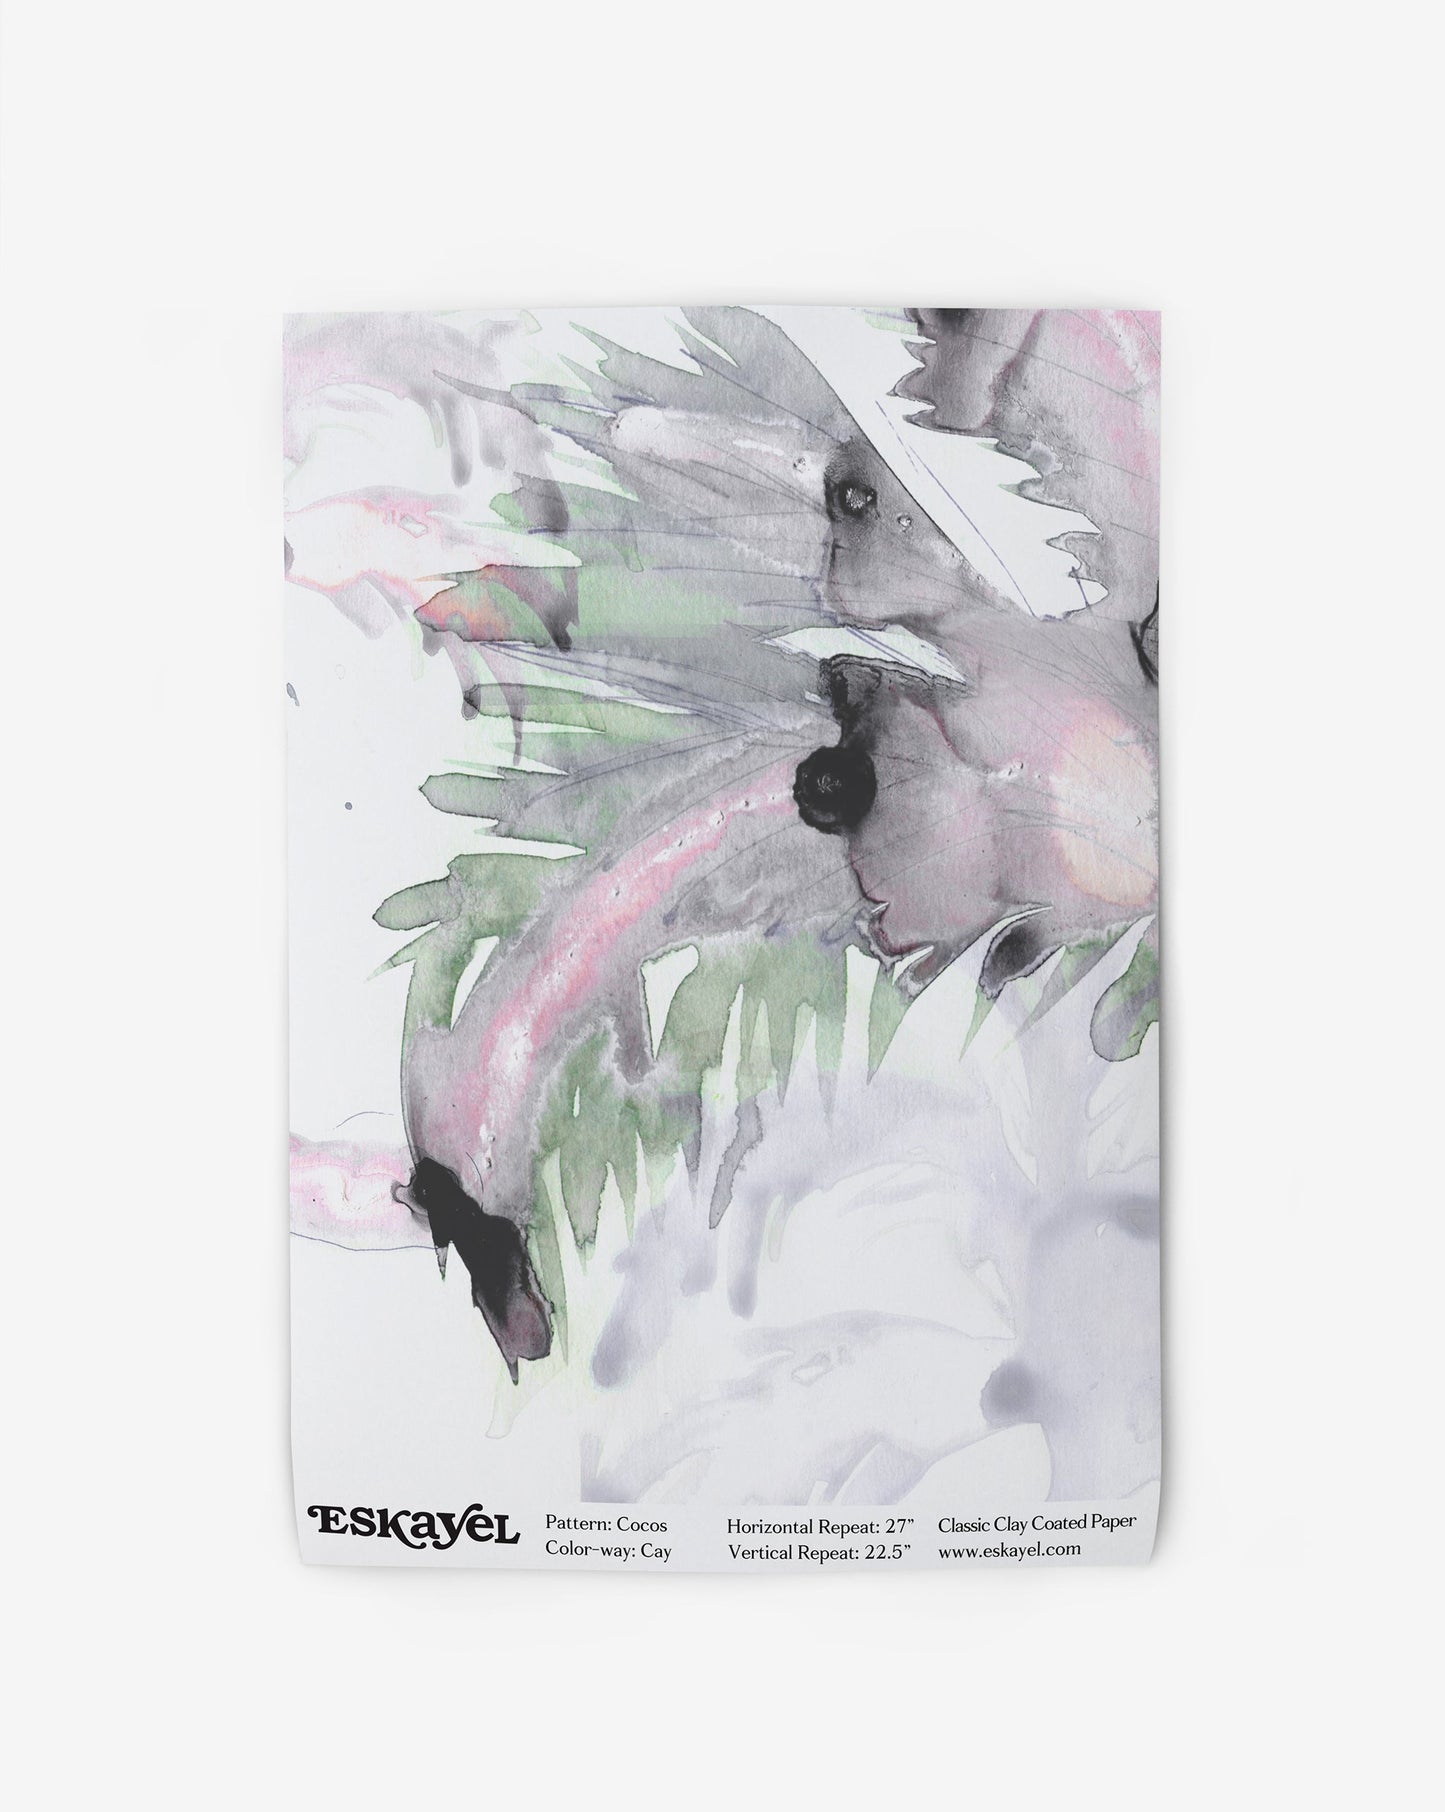 Abstract watercolor artwork featuring smudged grey, black, and pink hues on high-end fabrics, with the label "Cocos Wallpaper||Cay" at the bottom.